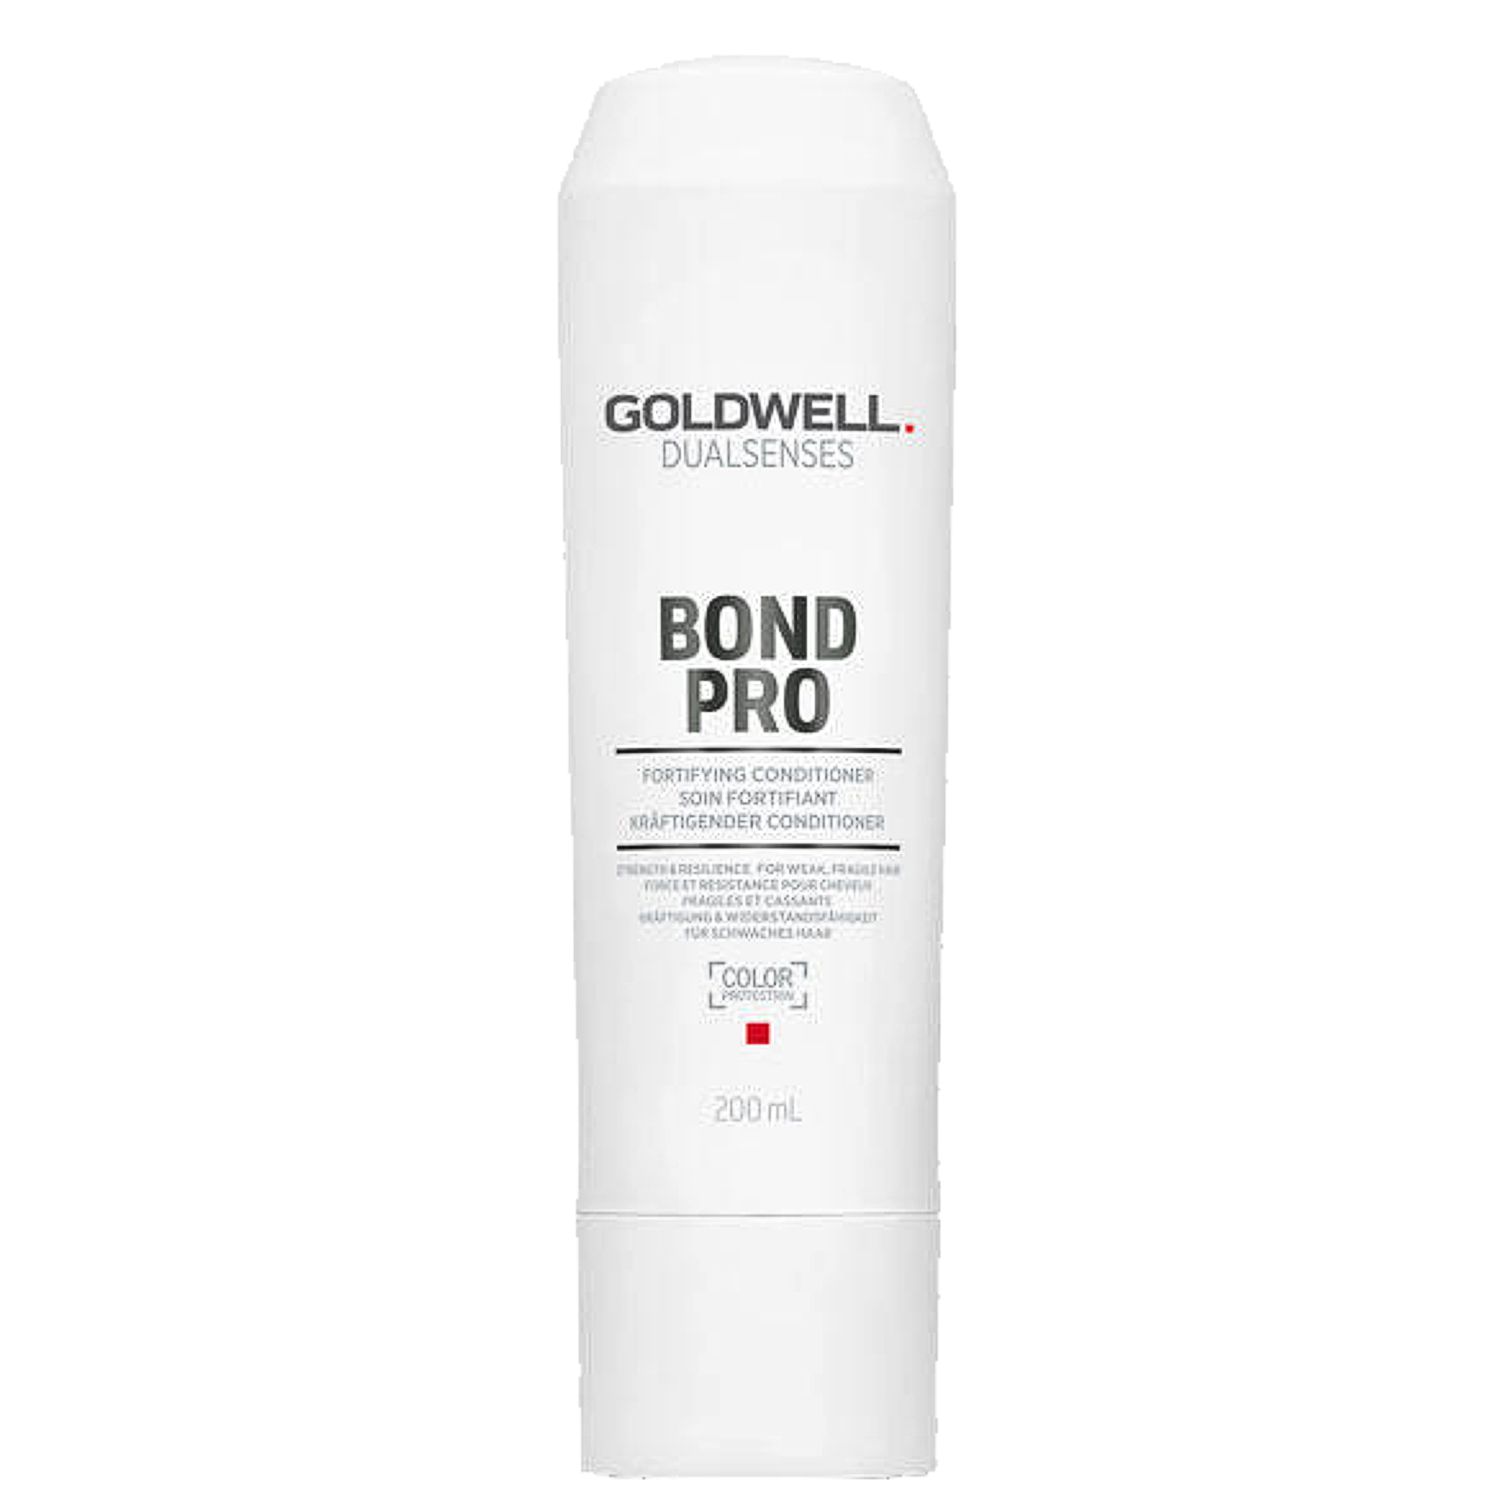 GOLDWELL Dualsenses BOND PRO Fortifying Conditioner 200 ml